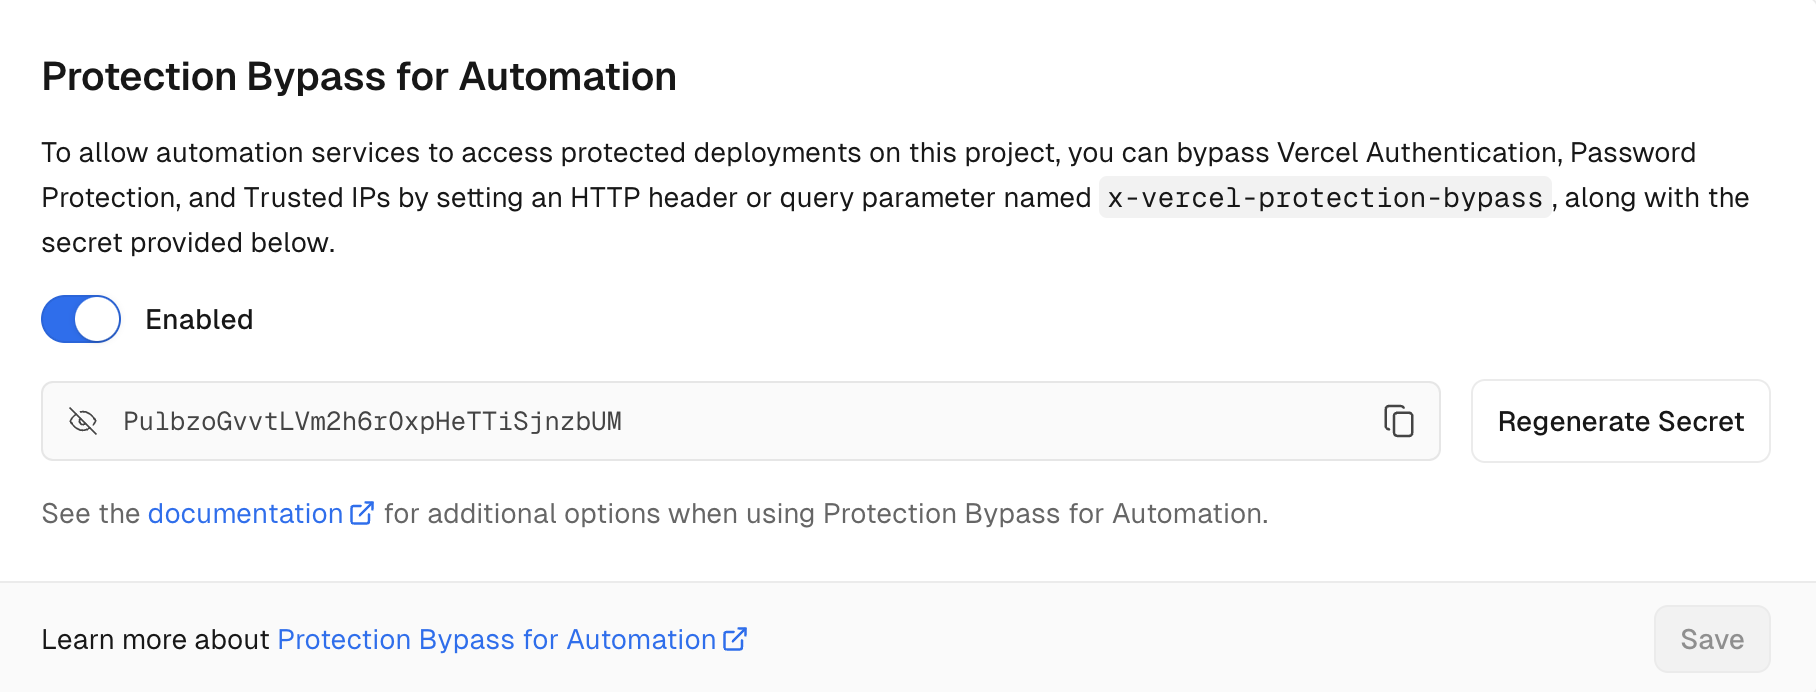 Protection Bypass for Automation option with advanced deployment protection
feature.